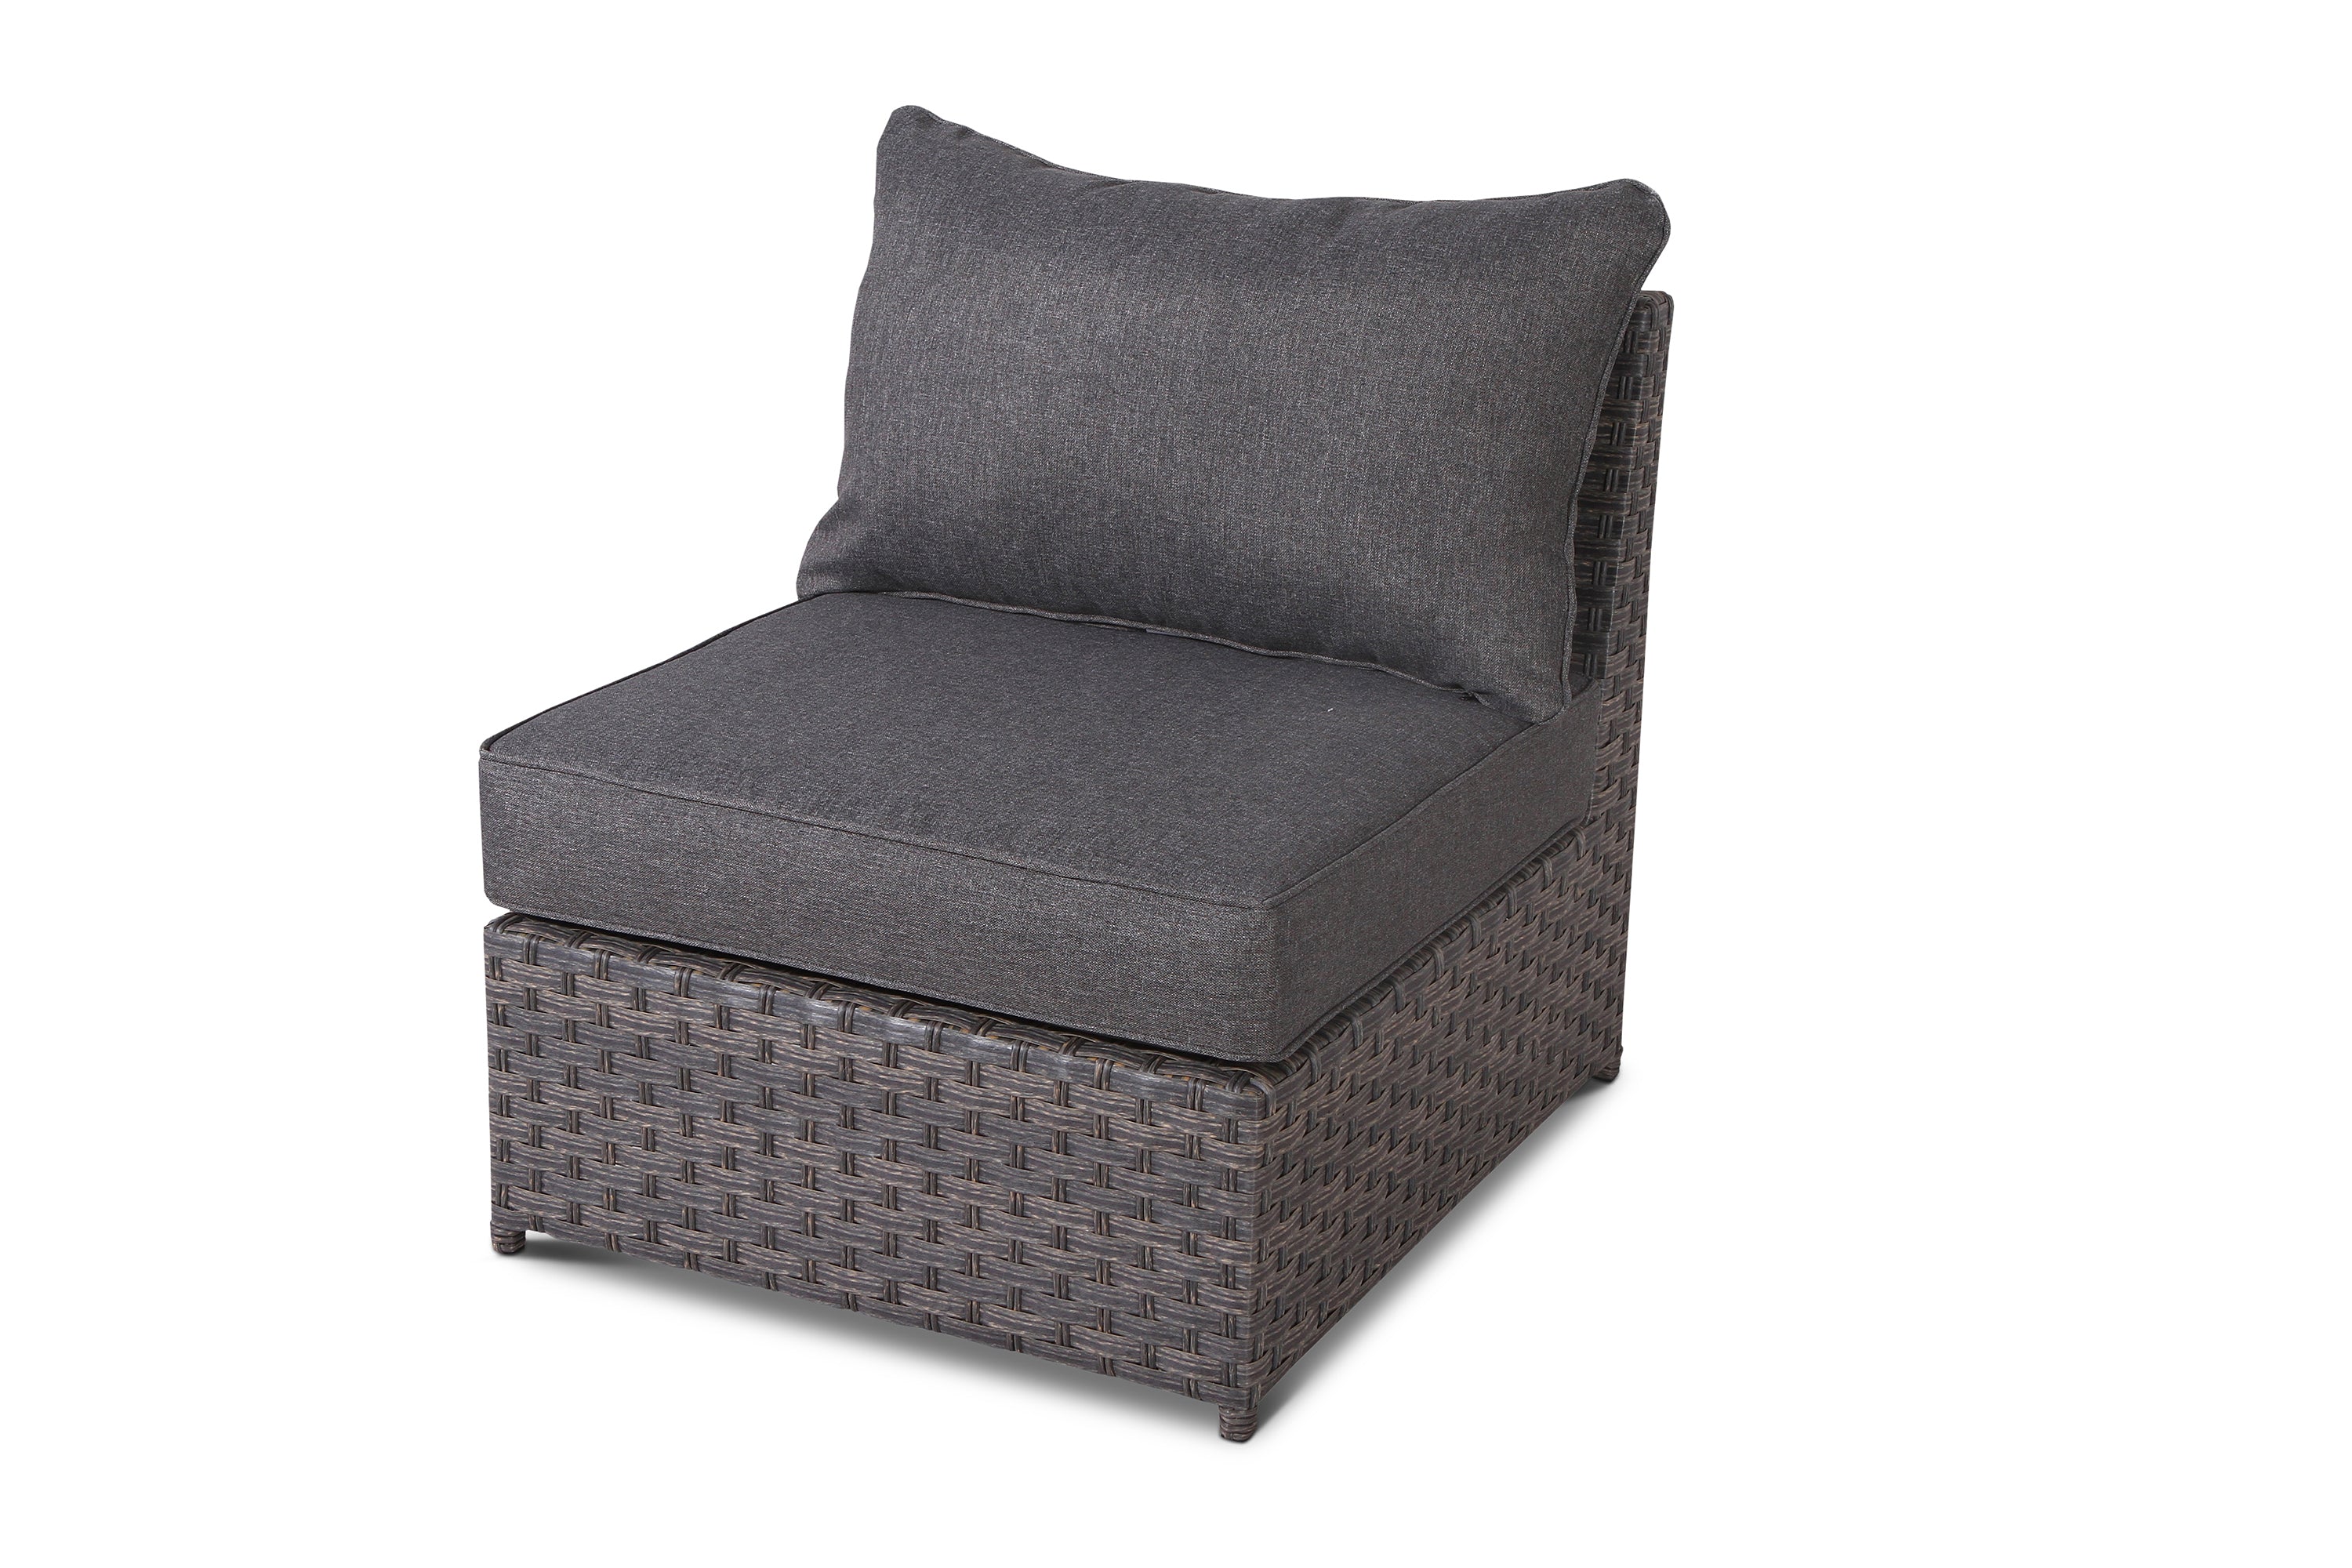 Cromwell Outdoor Wicker Armless Chair